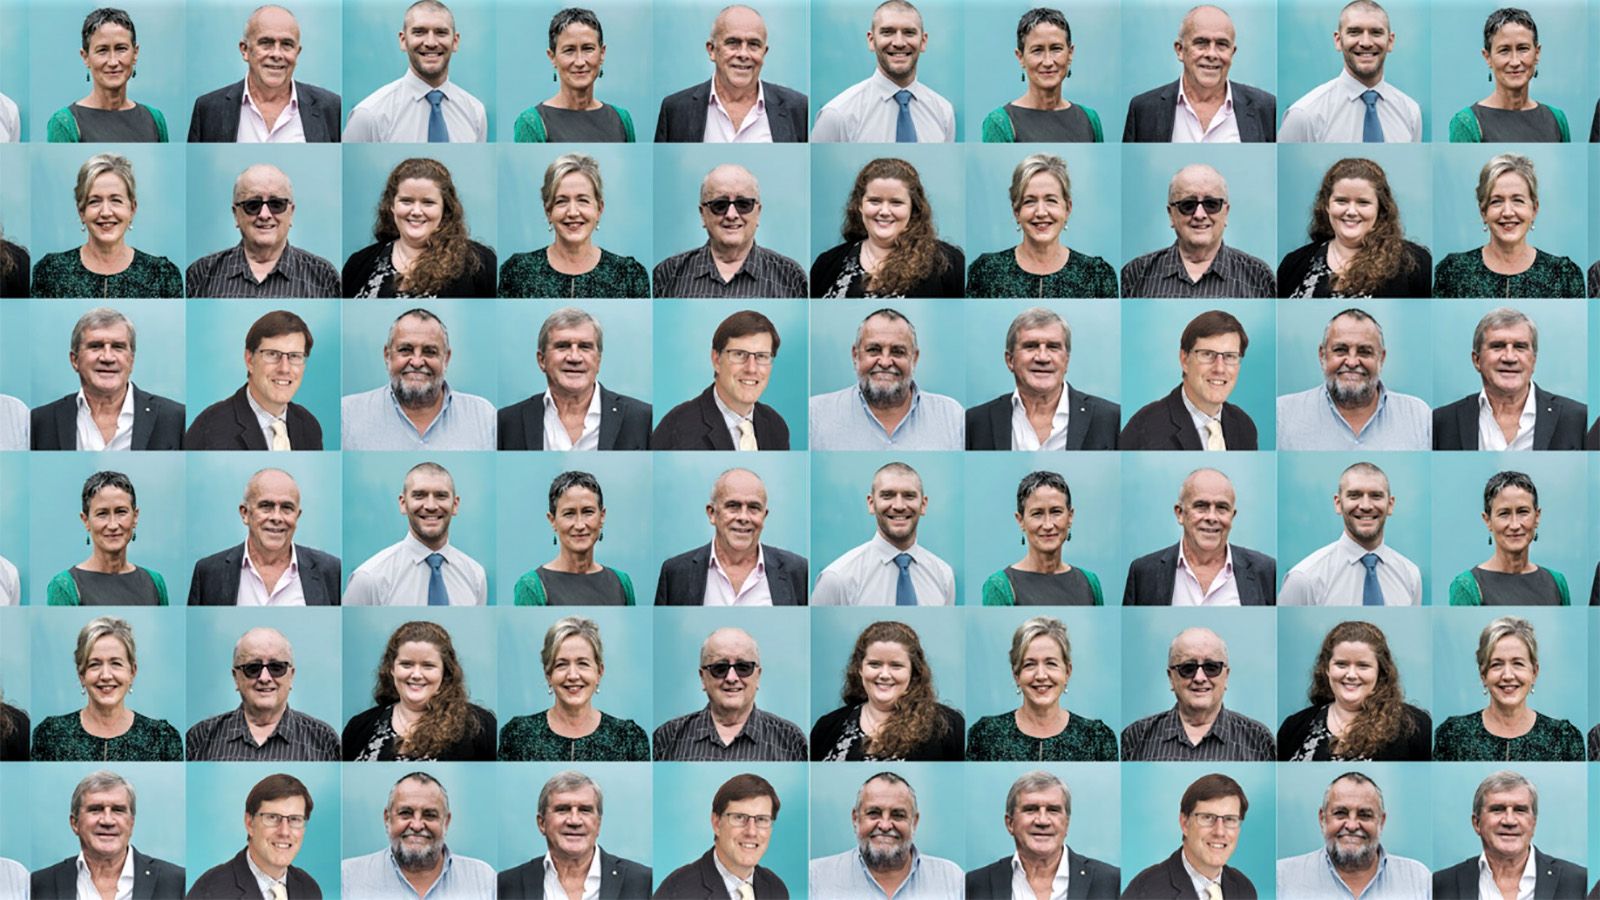 Photographs of Eurobodalla Councillors repeated in a square grid pattern banner image